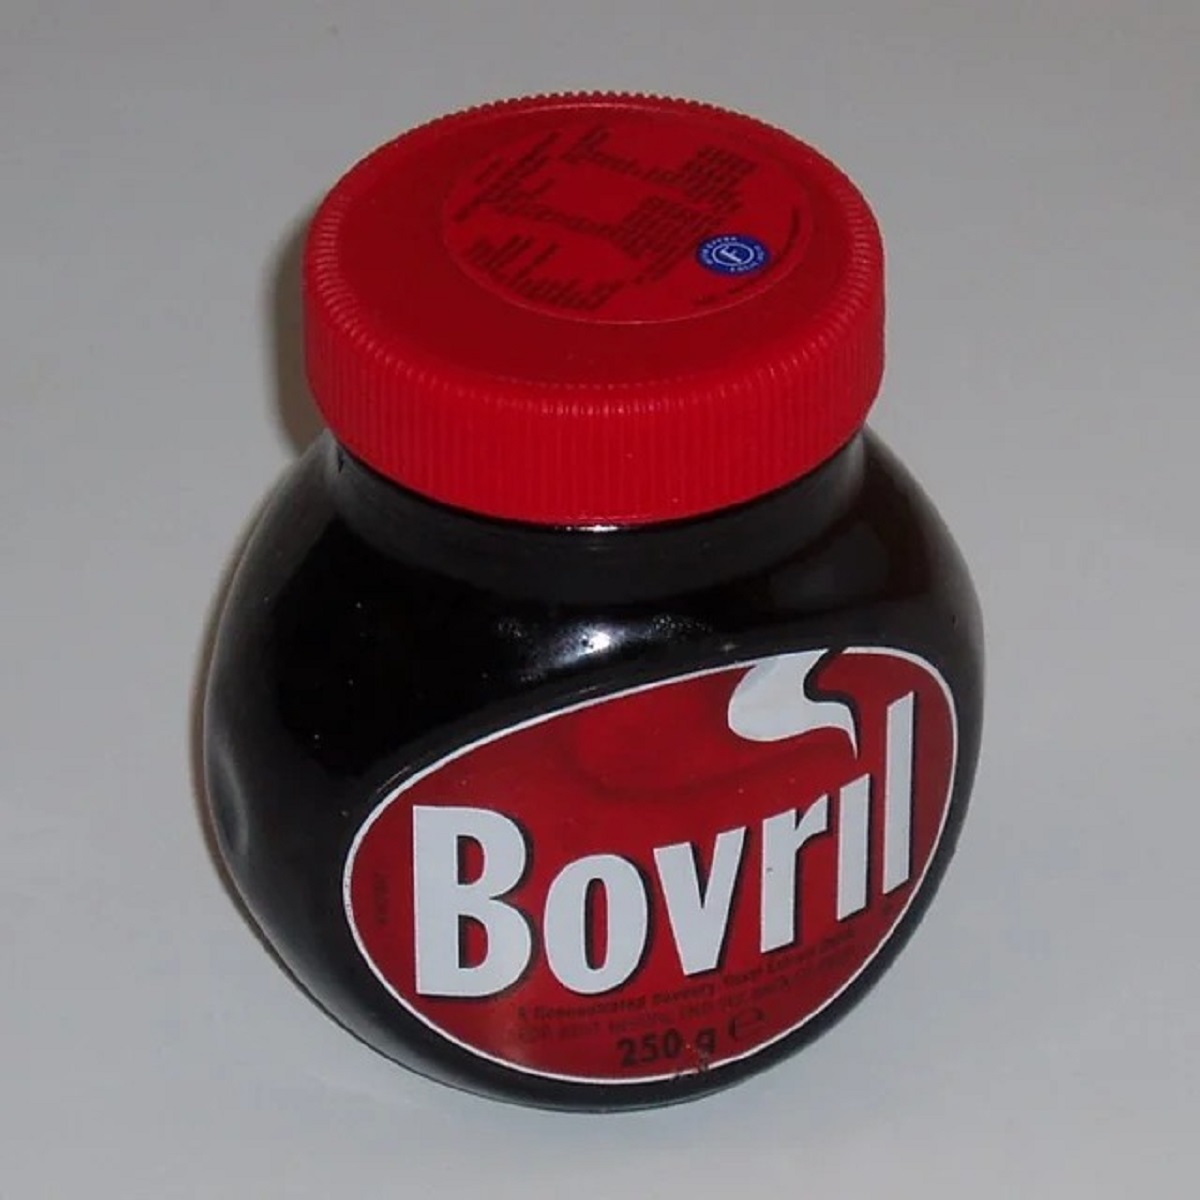 that in the UK, a thick beef paste called Bovril is spread on toast or reconstituted into “beef tea.” It’s name comes from the Latin bovinus, for ox; and vril, a substance from a late 1800s novel used by a secret master race to give them special powers.